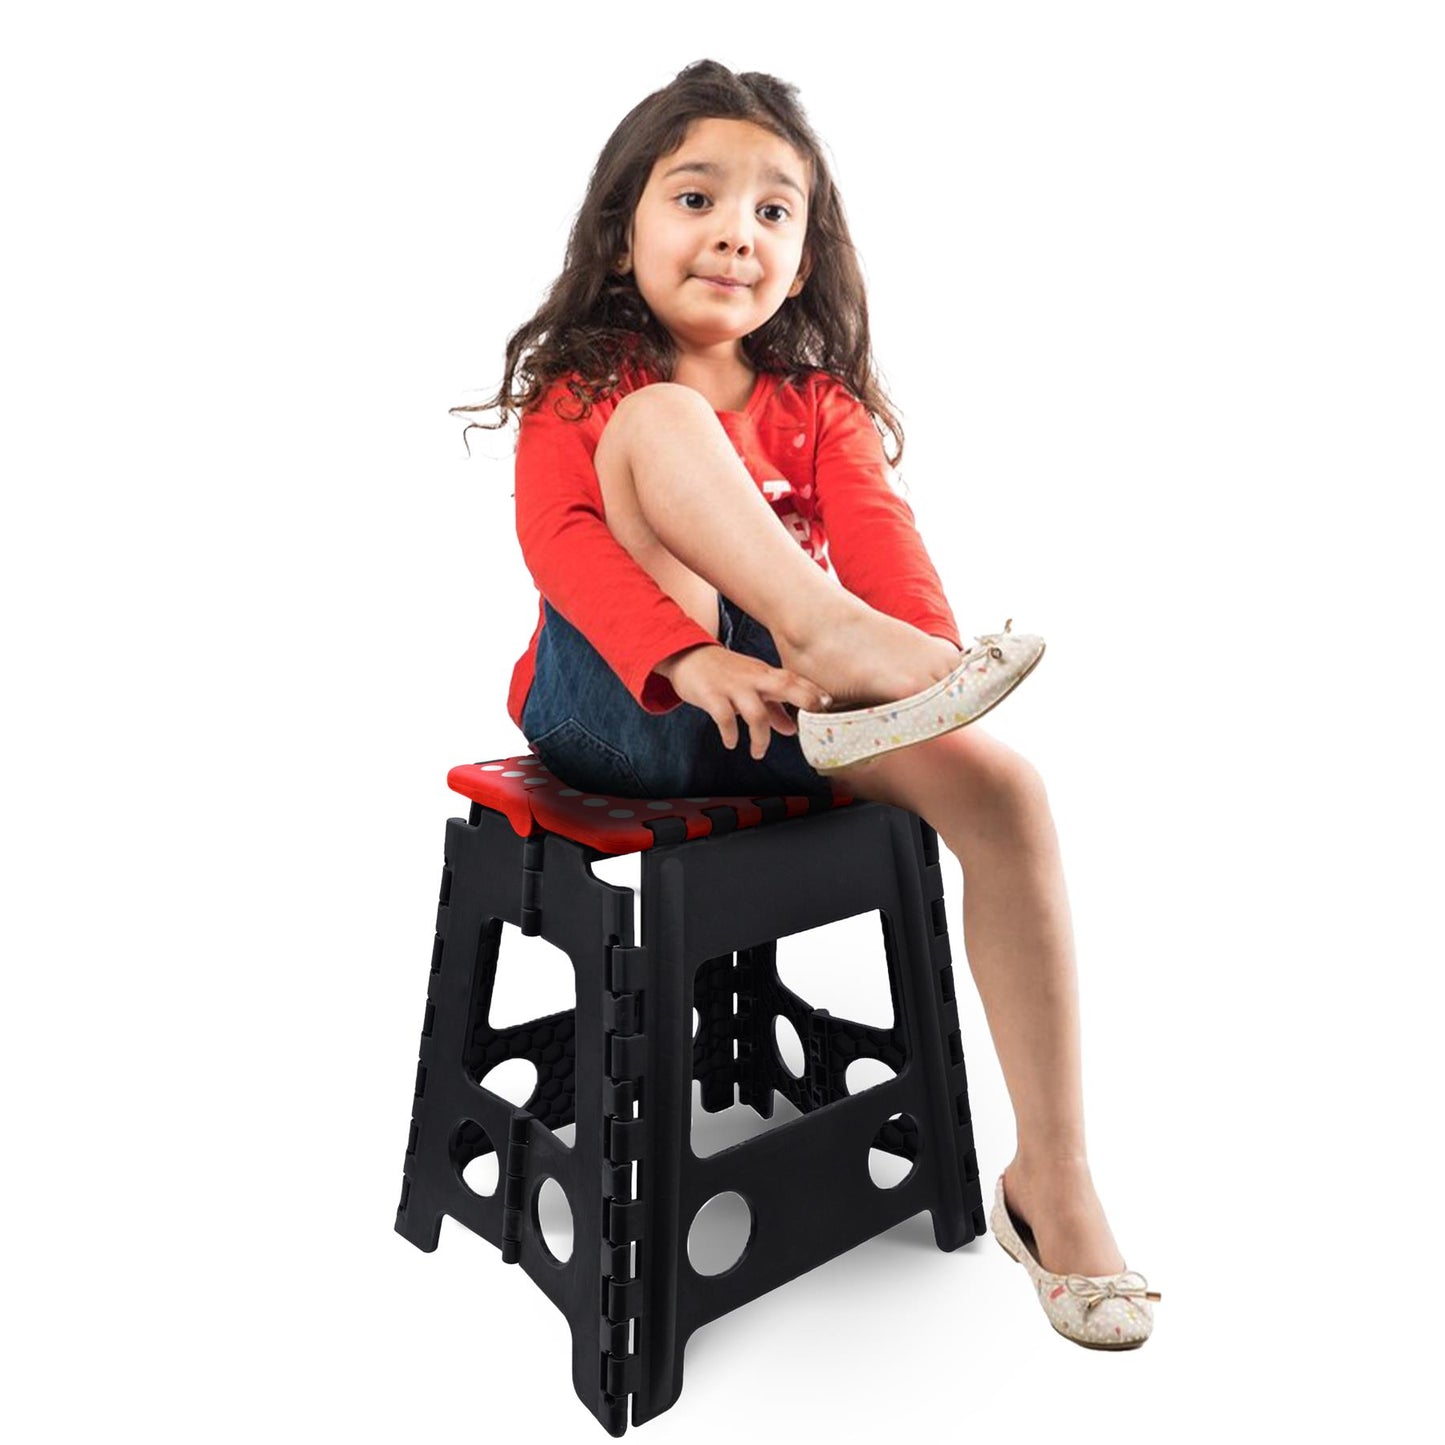 Collapsible Footstool with Handle, Heavy Duty Folding Stool, Large Step Ladder